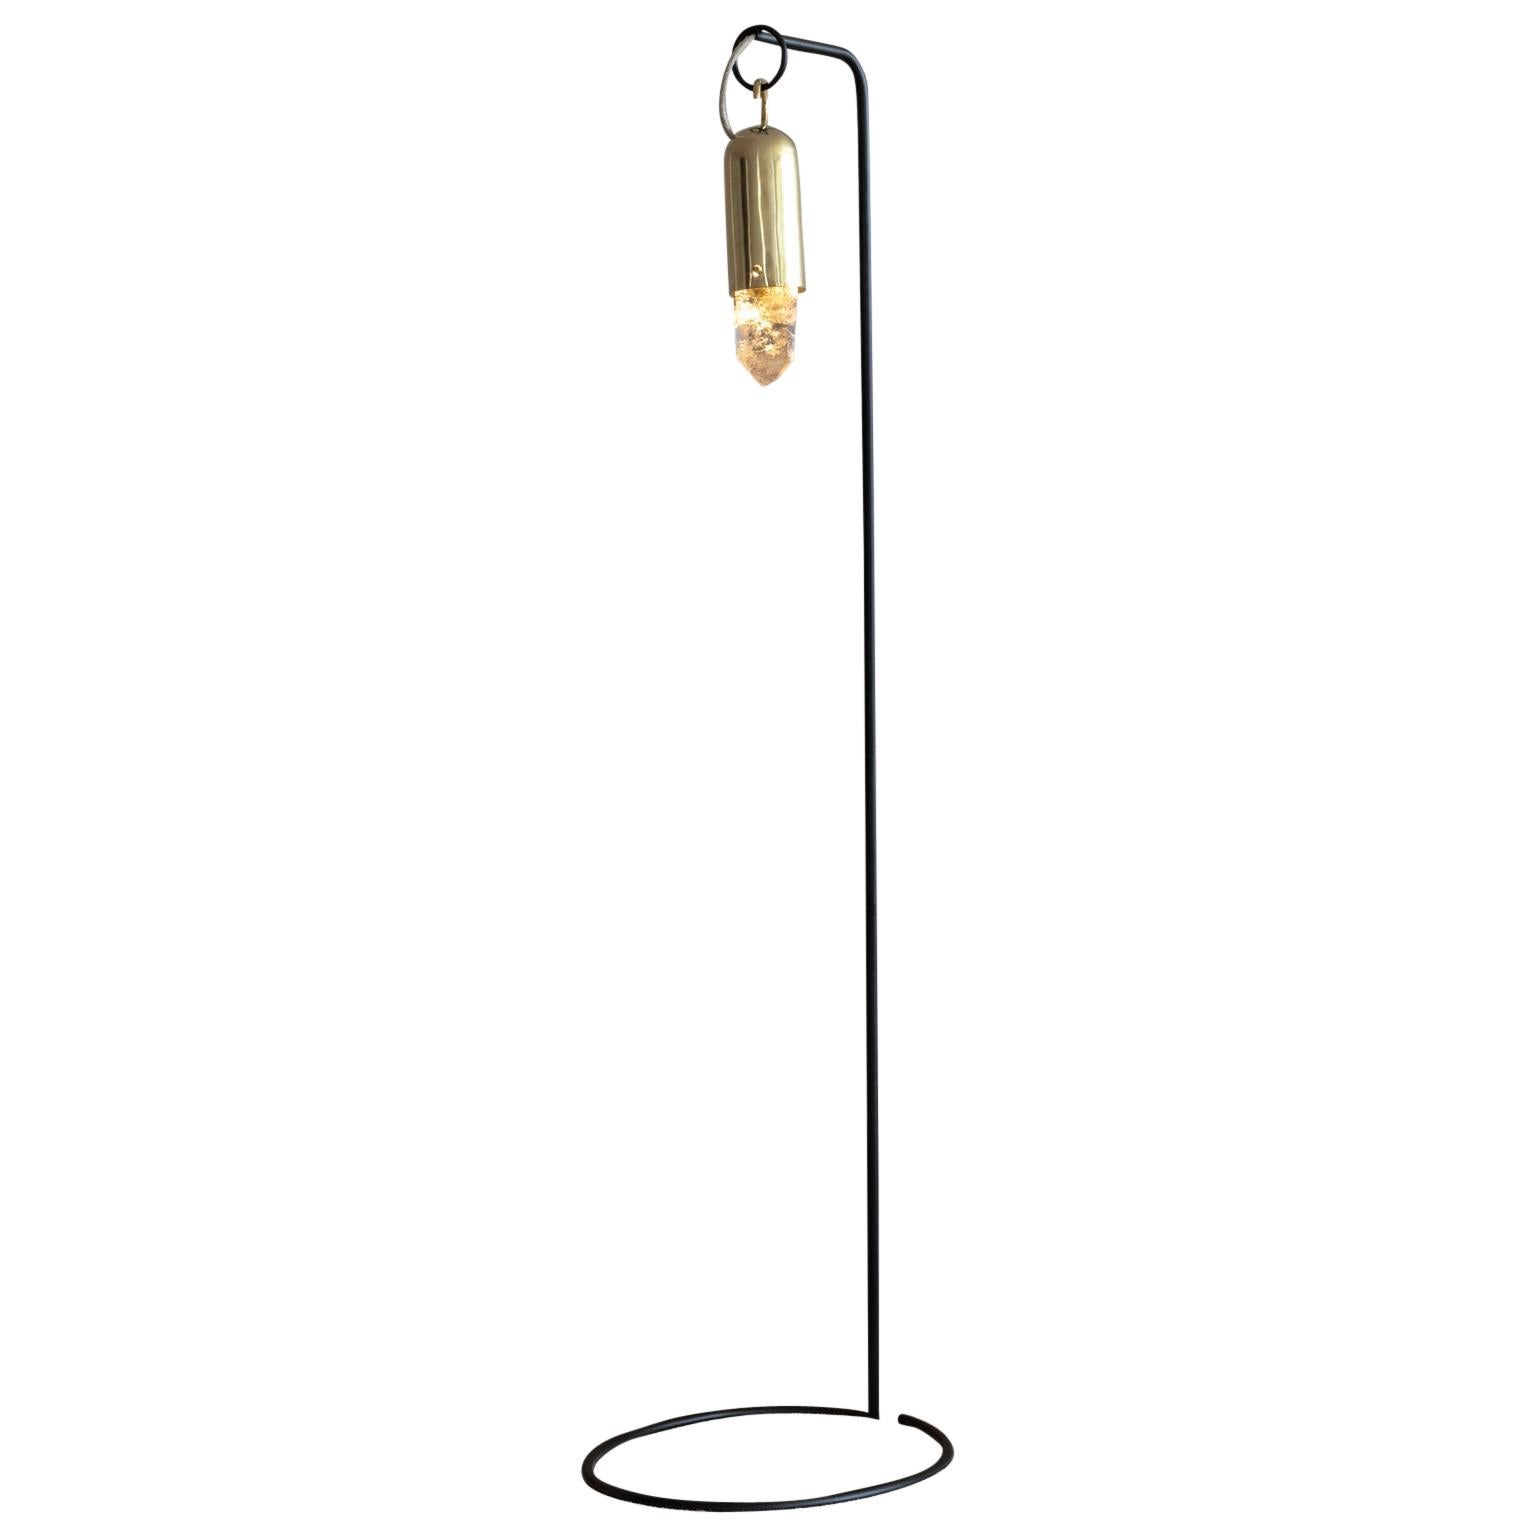 "Sino" Contemporary Golden Floor Lamp in Cast Brass and Illuminated Raw Crystal